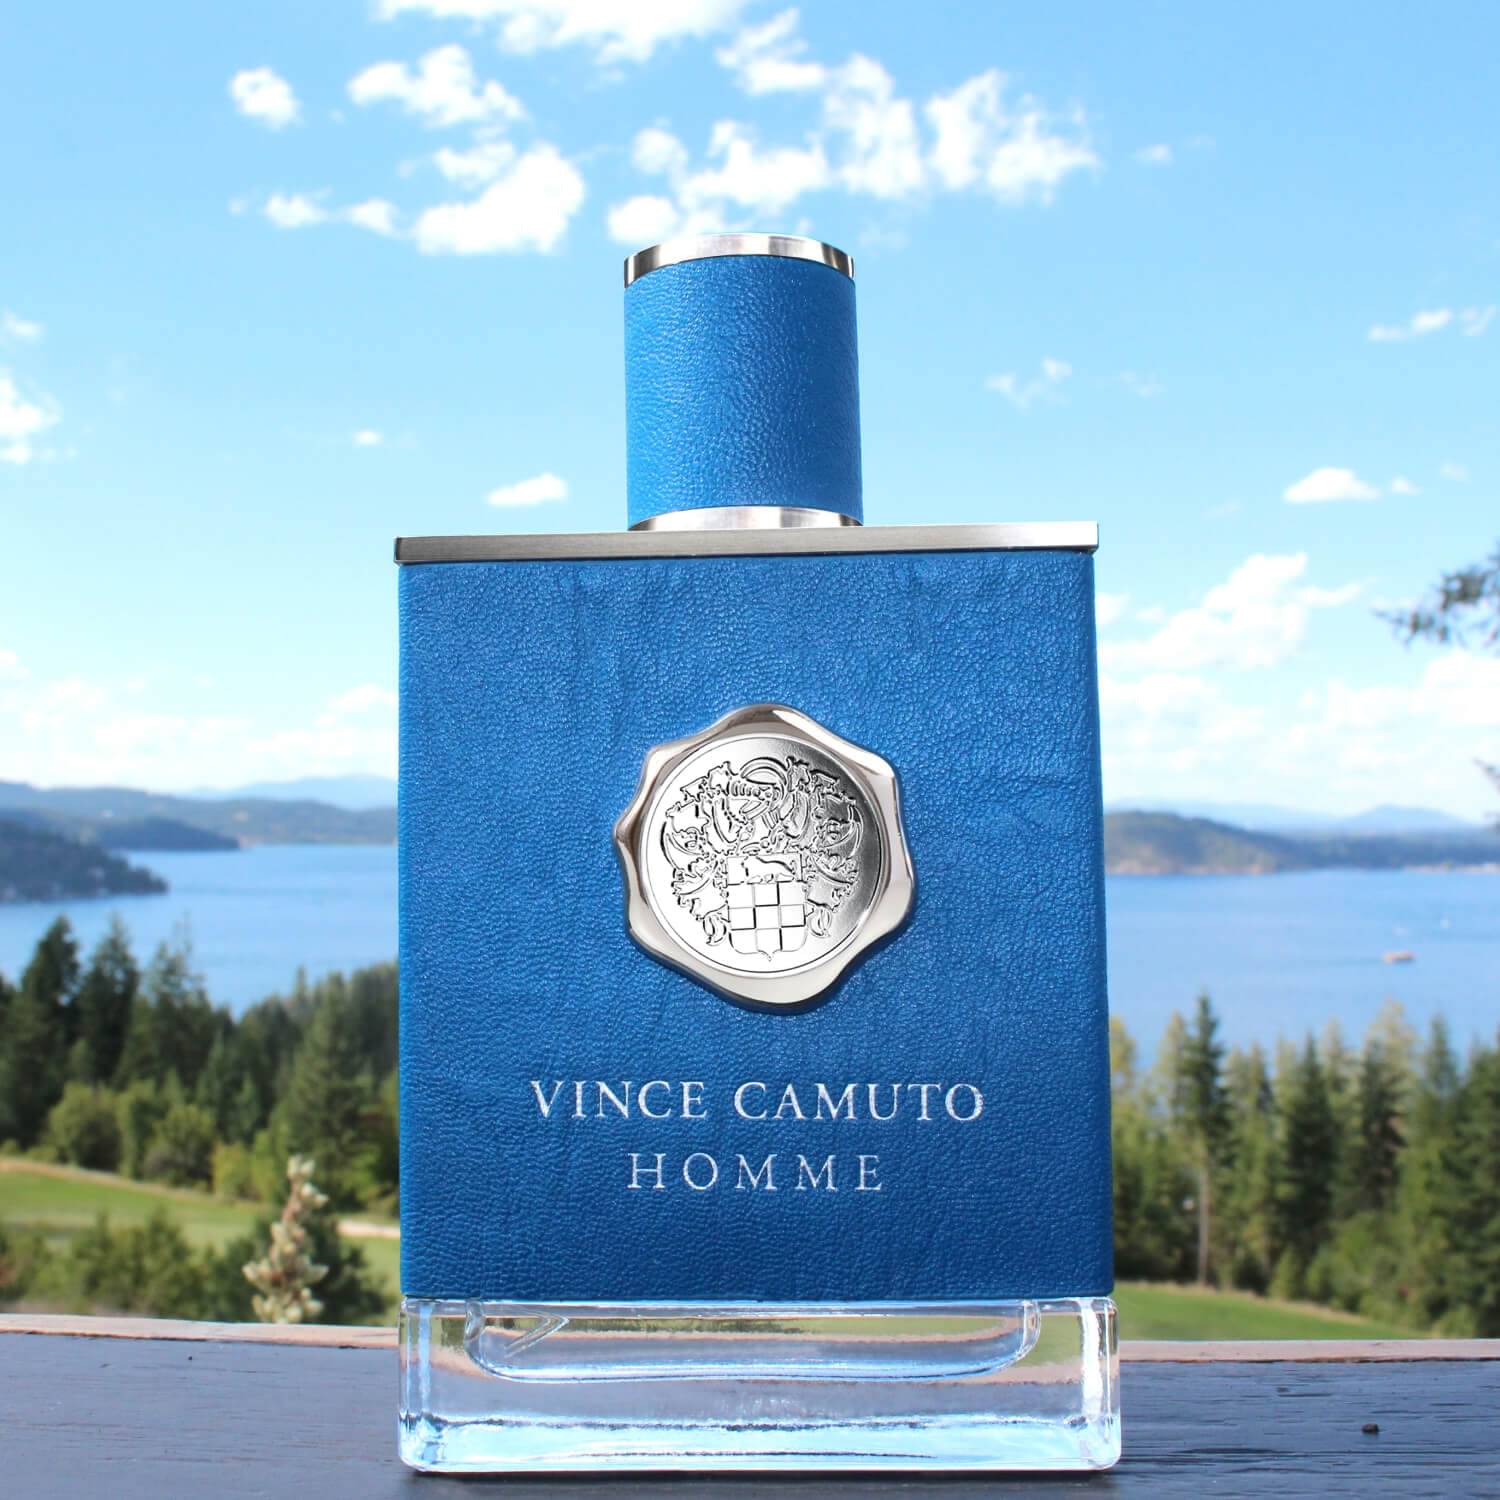 Bella Vince Camuto by Vince Camuto: Midsummer Day's Dream - Scentbird Blog